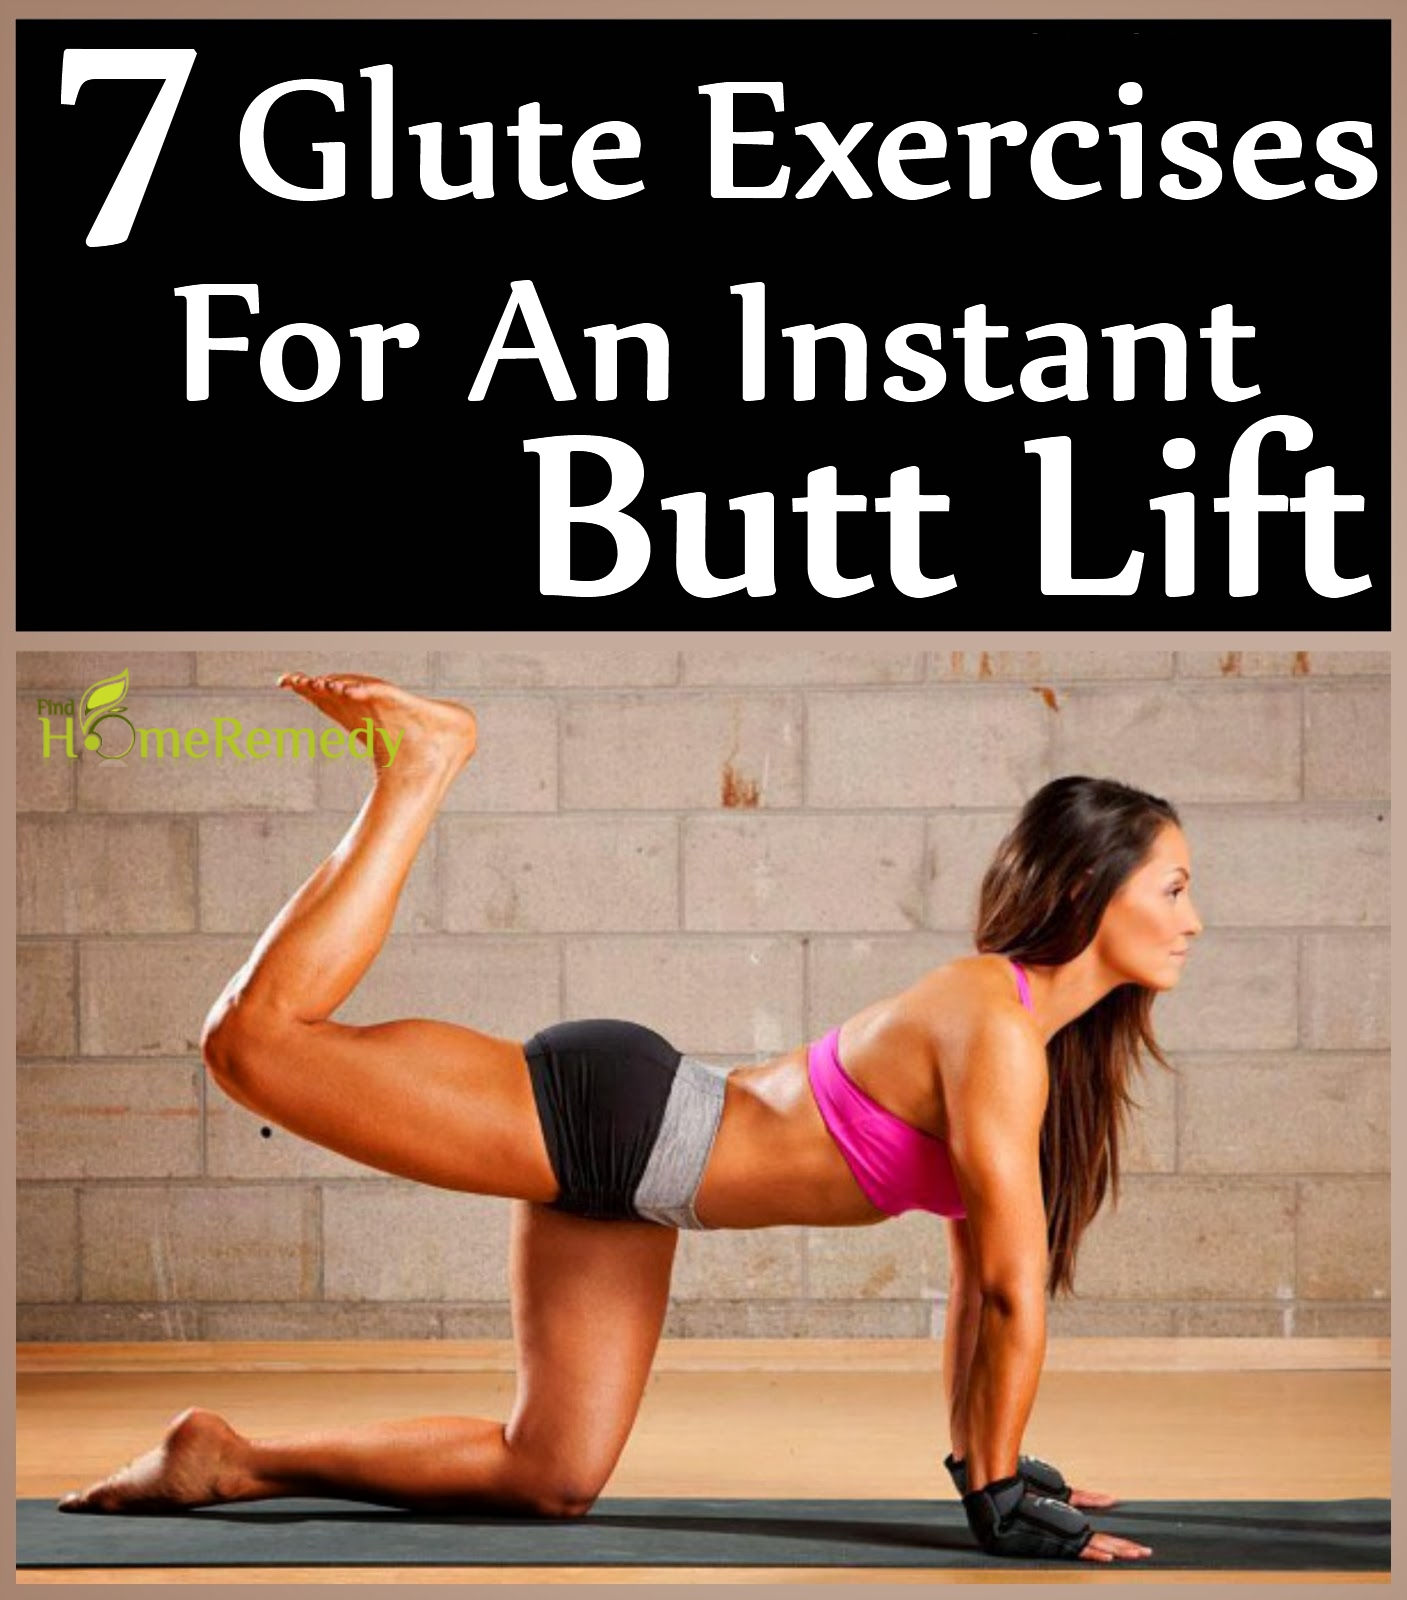 7 Glute Exercises For An Instant Butt Lift